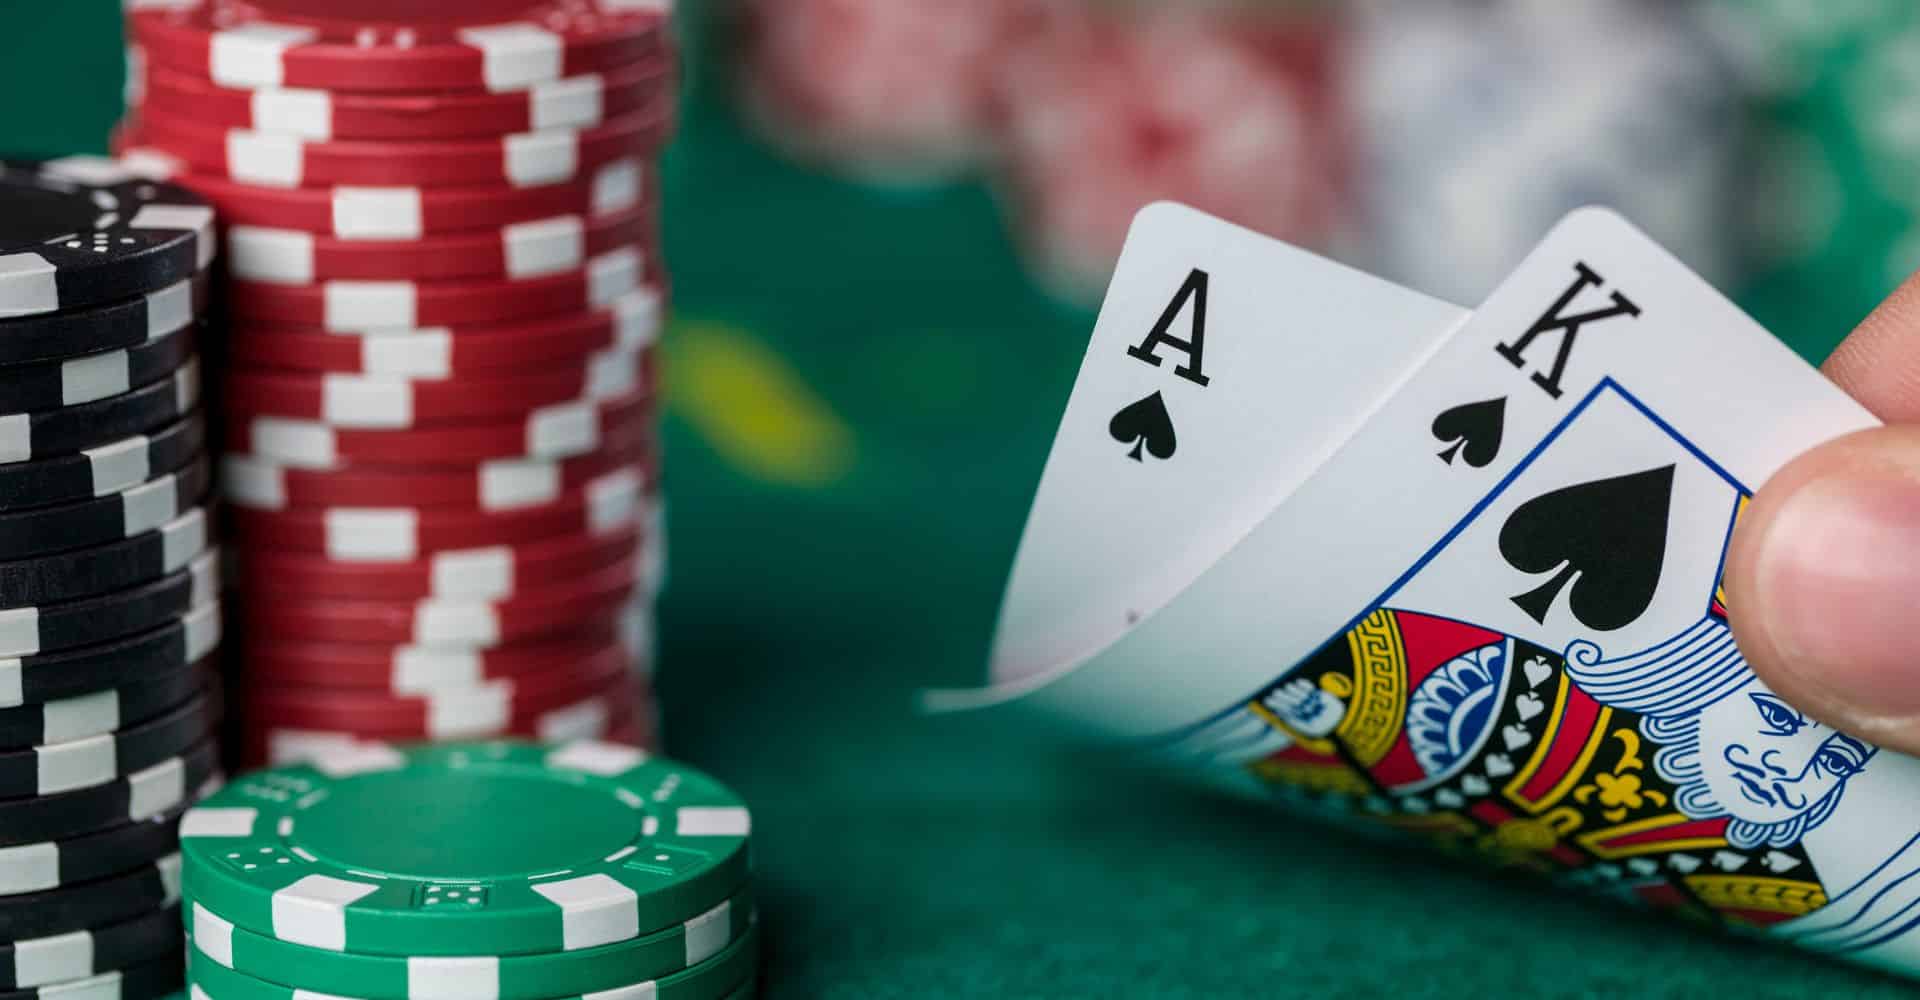 Ranking to the Top - The Best Hands in Poker to Play